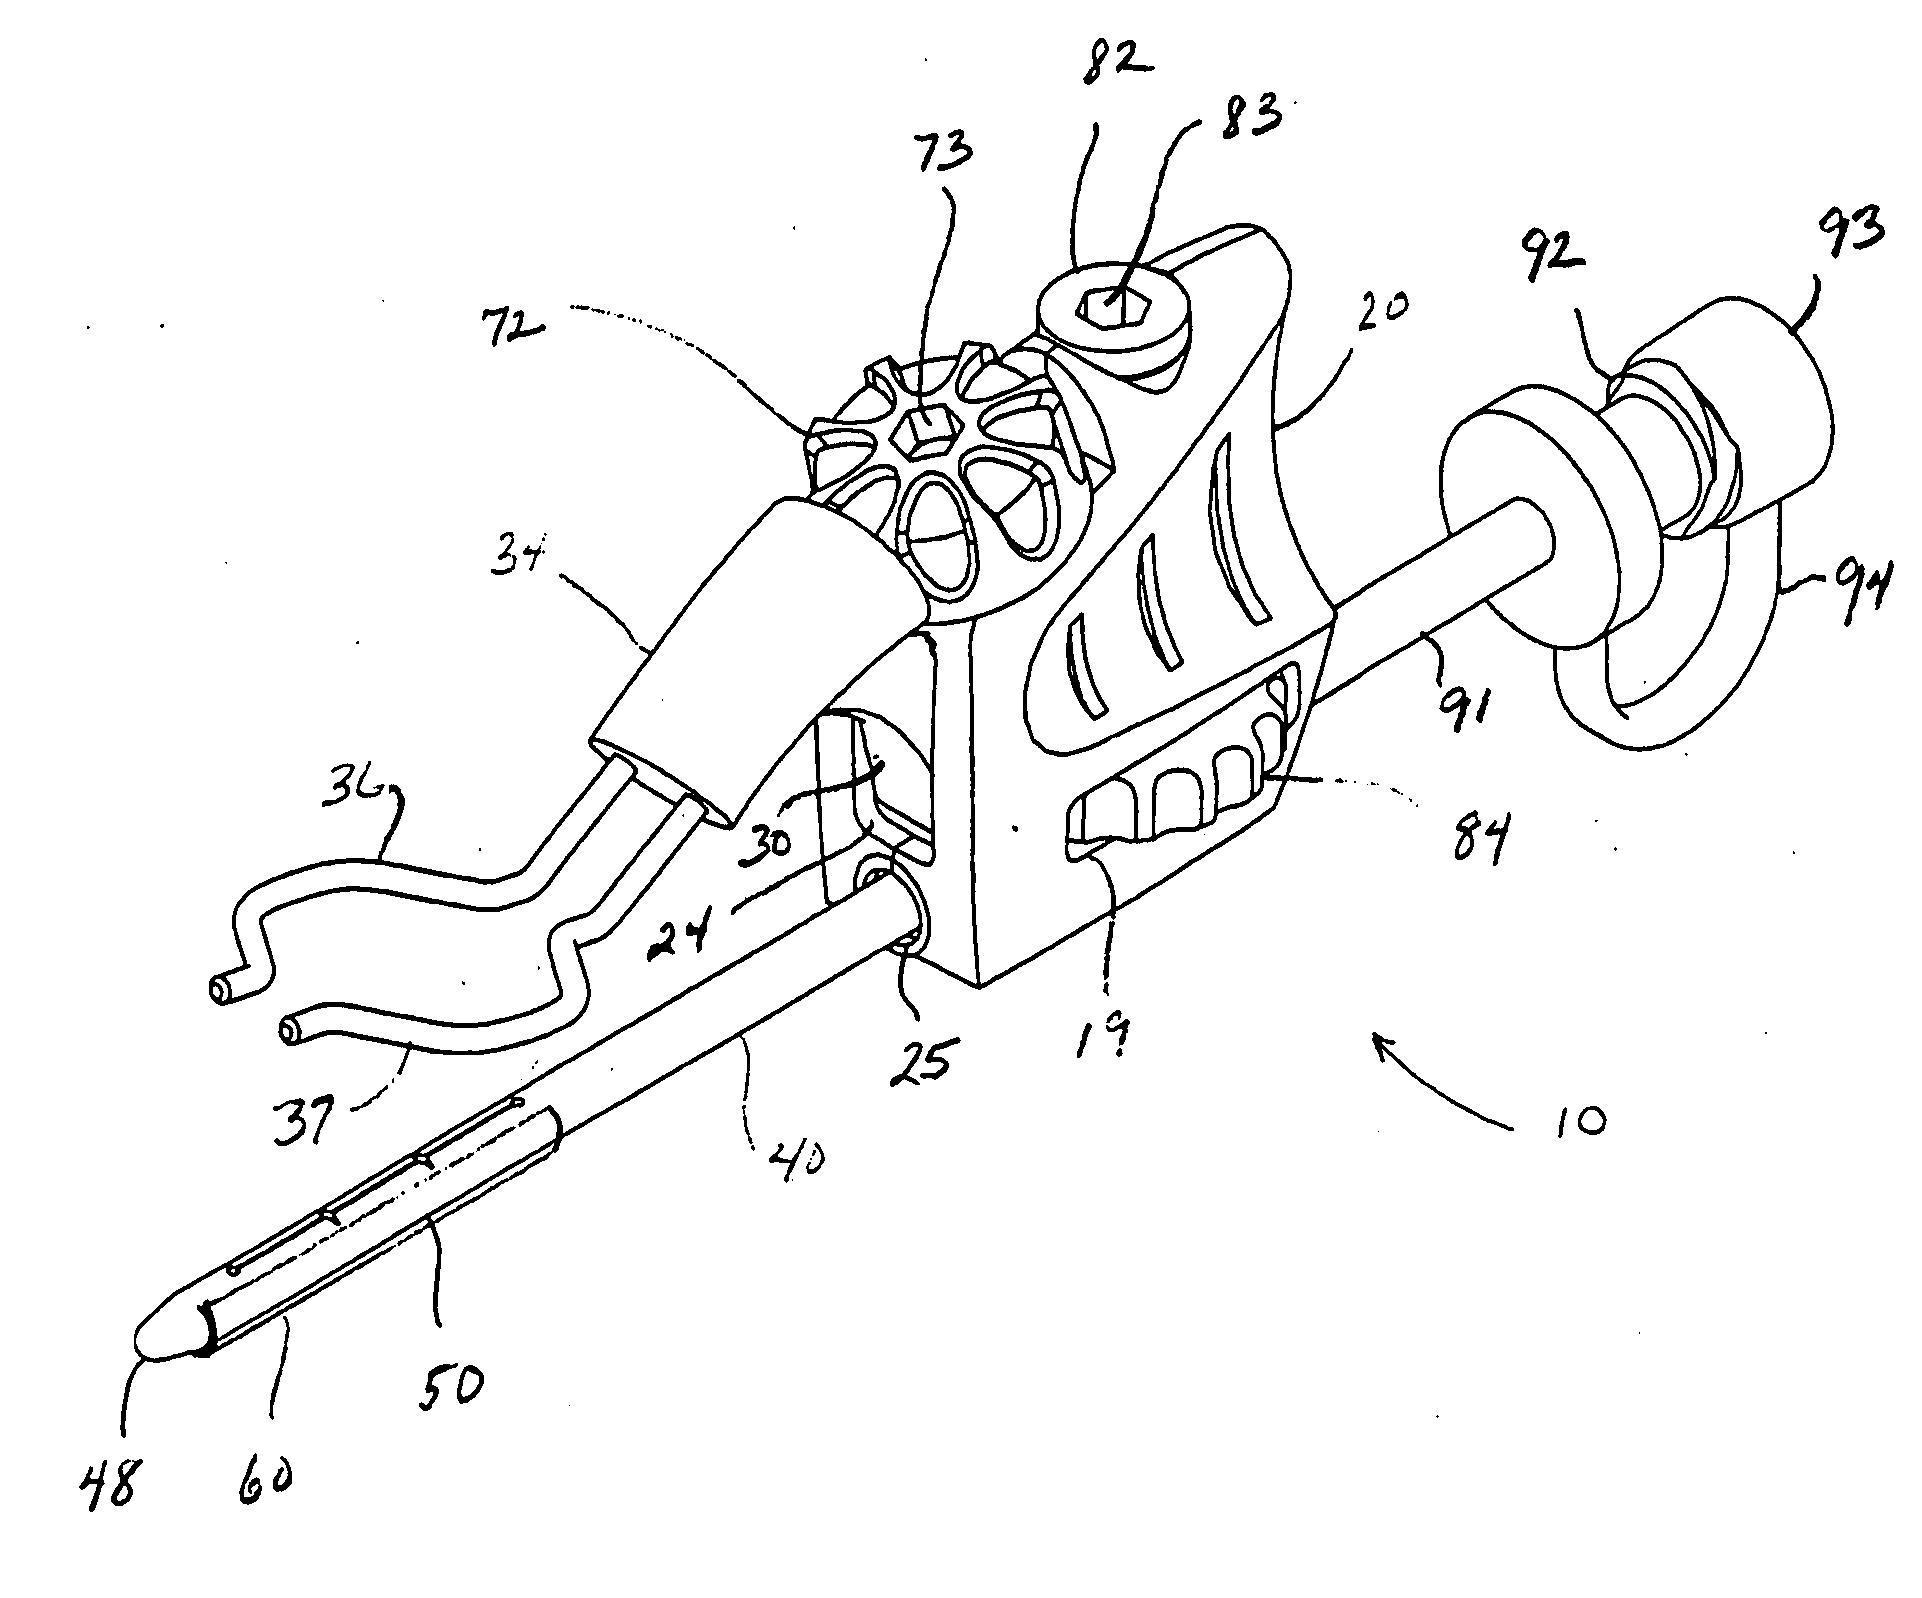 Device and method for performing multiple anastomoses